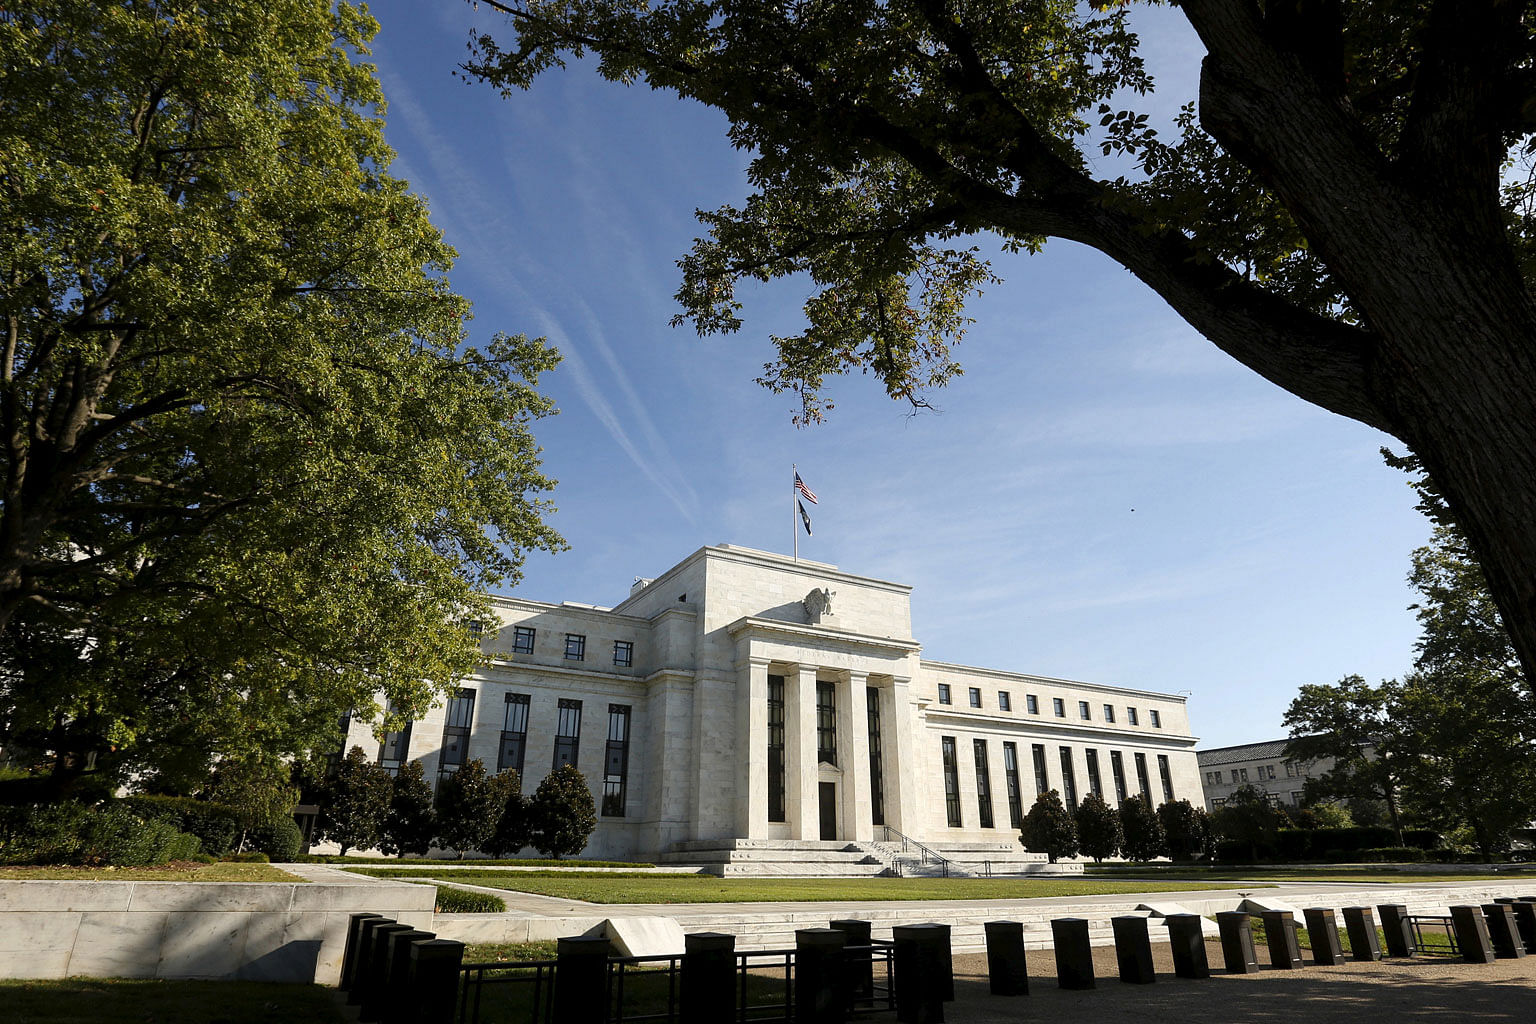 The Federal Reserve headquarters in Washington. UBS now expects the Fed to hike interest rates four times in 2018 (from three) and three times in 2019 (from two), taking the Fed fund target rate to just over 3 per cent by end-2019.